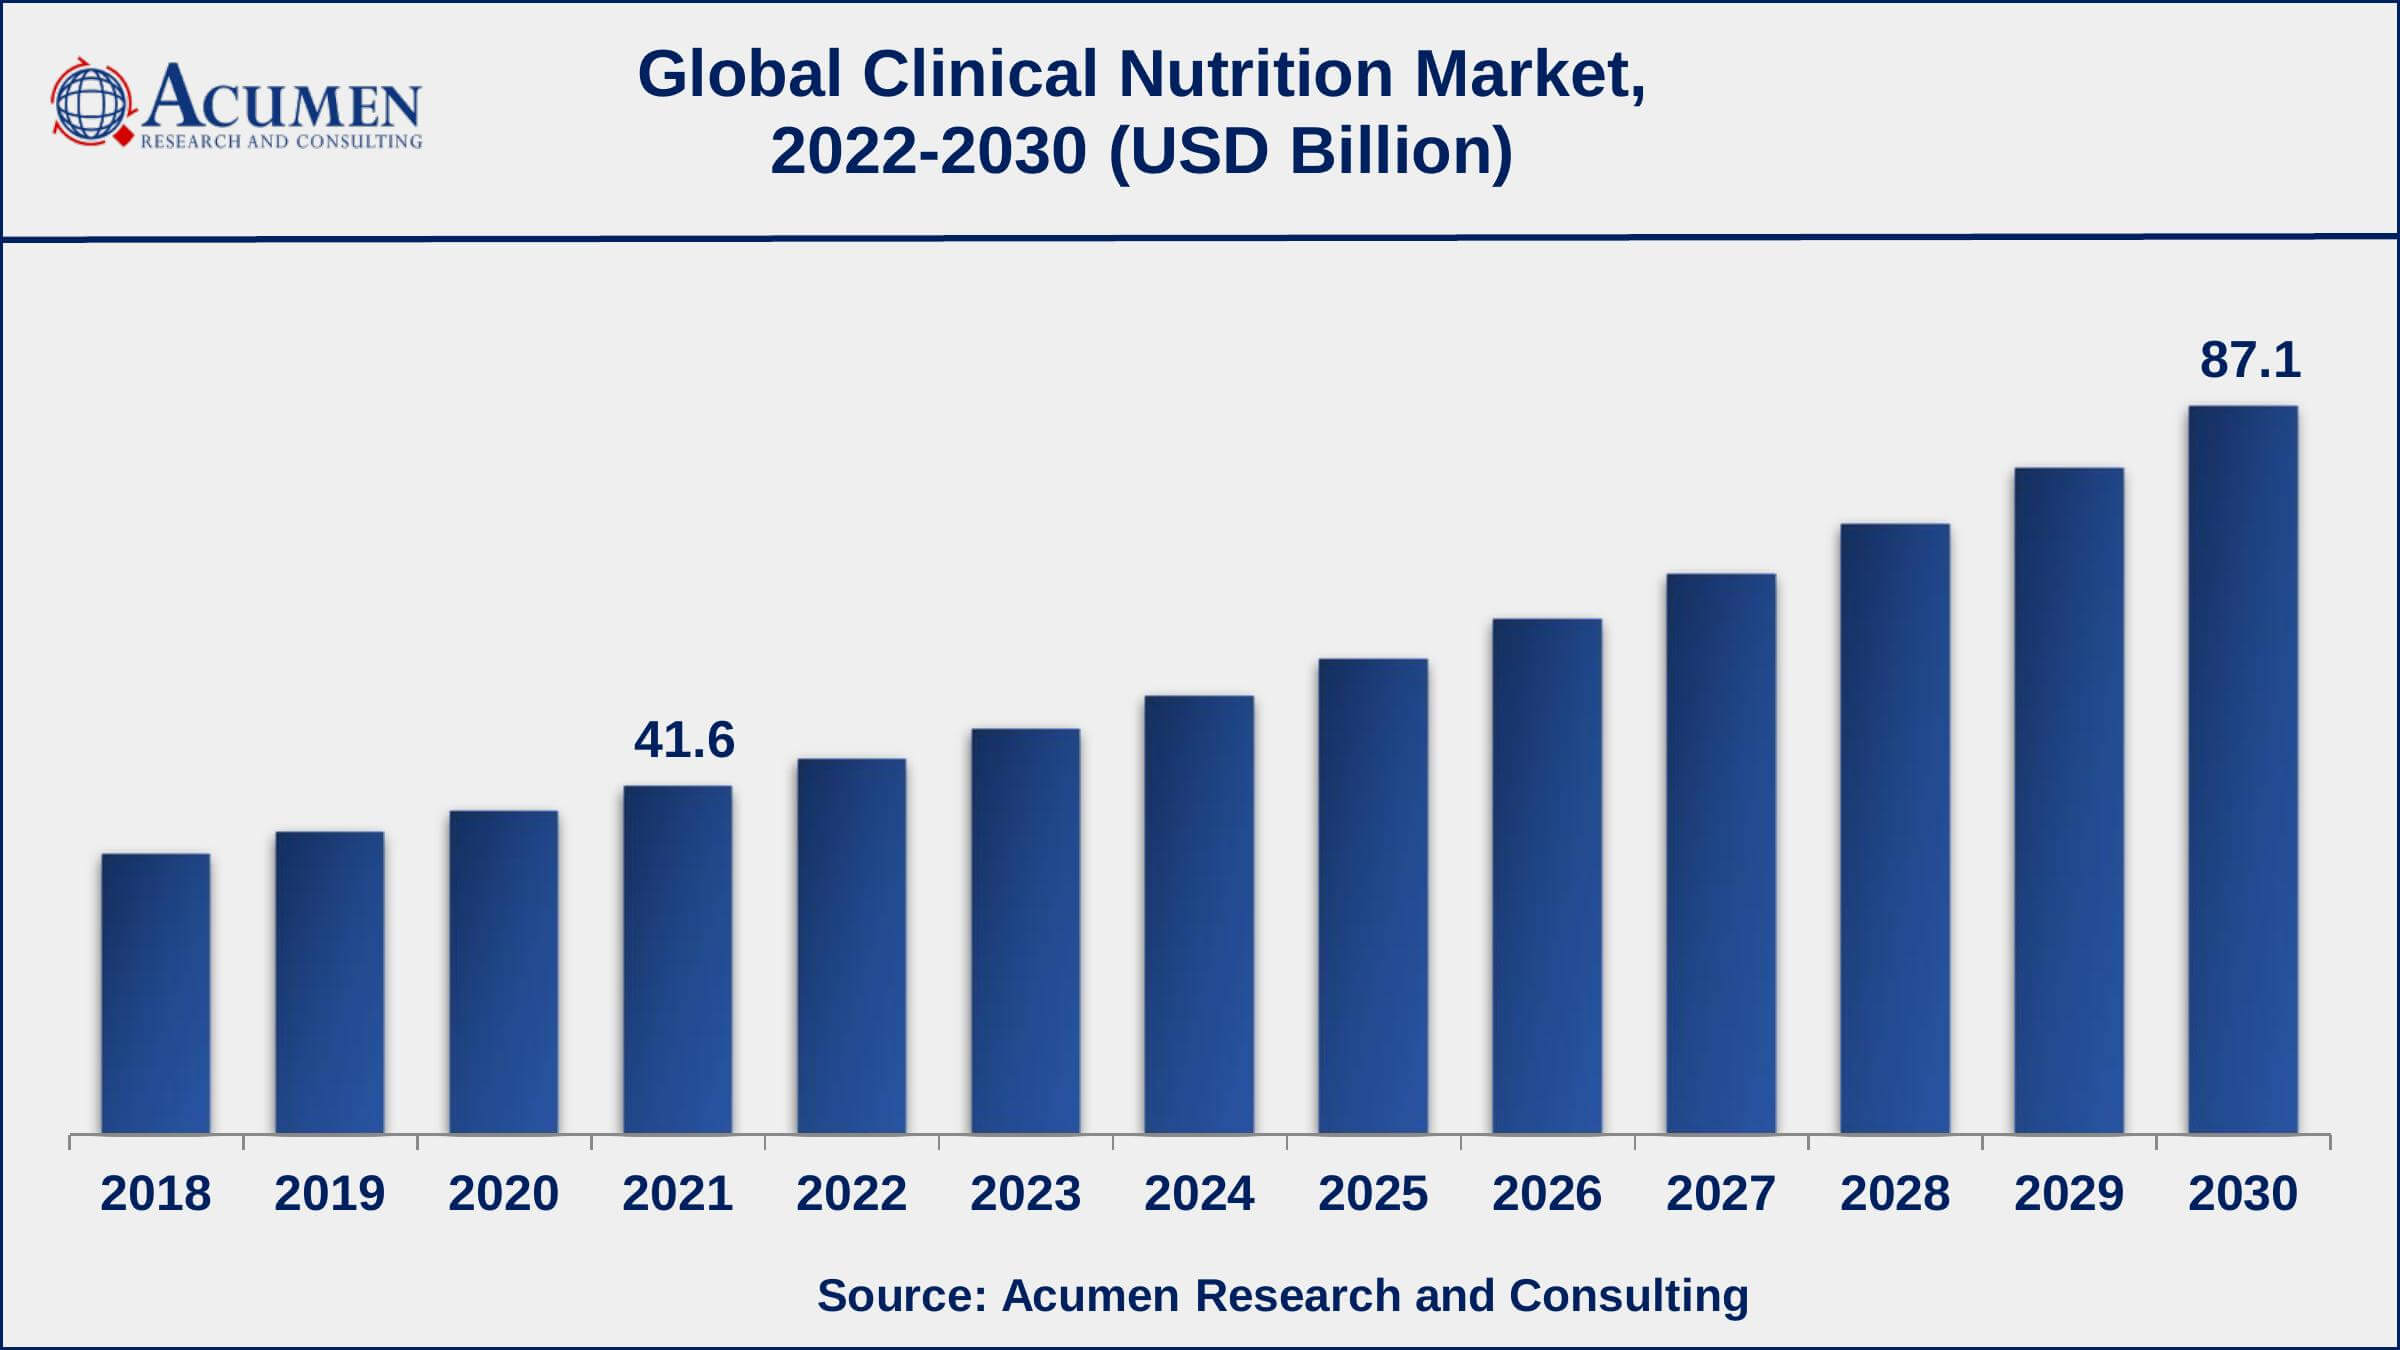 Asia-Pacific clinical nutrition market growth will register CAGR of over 9% from 2022 to 2030